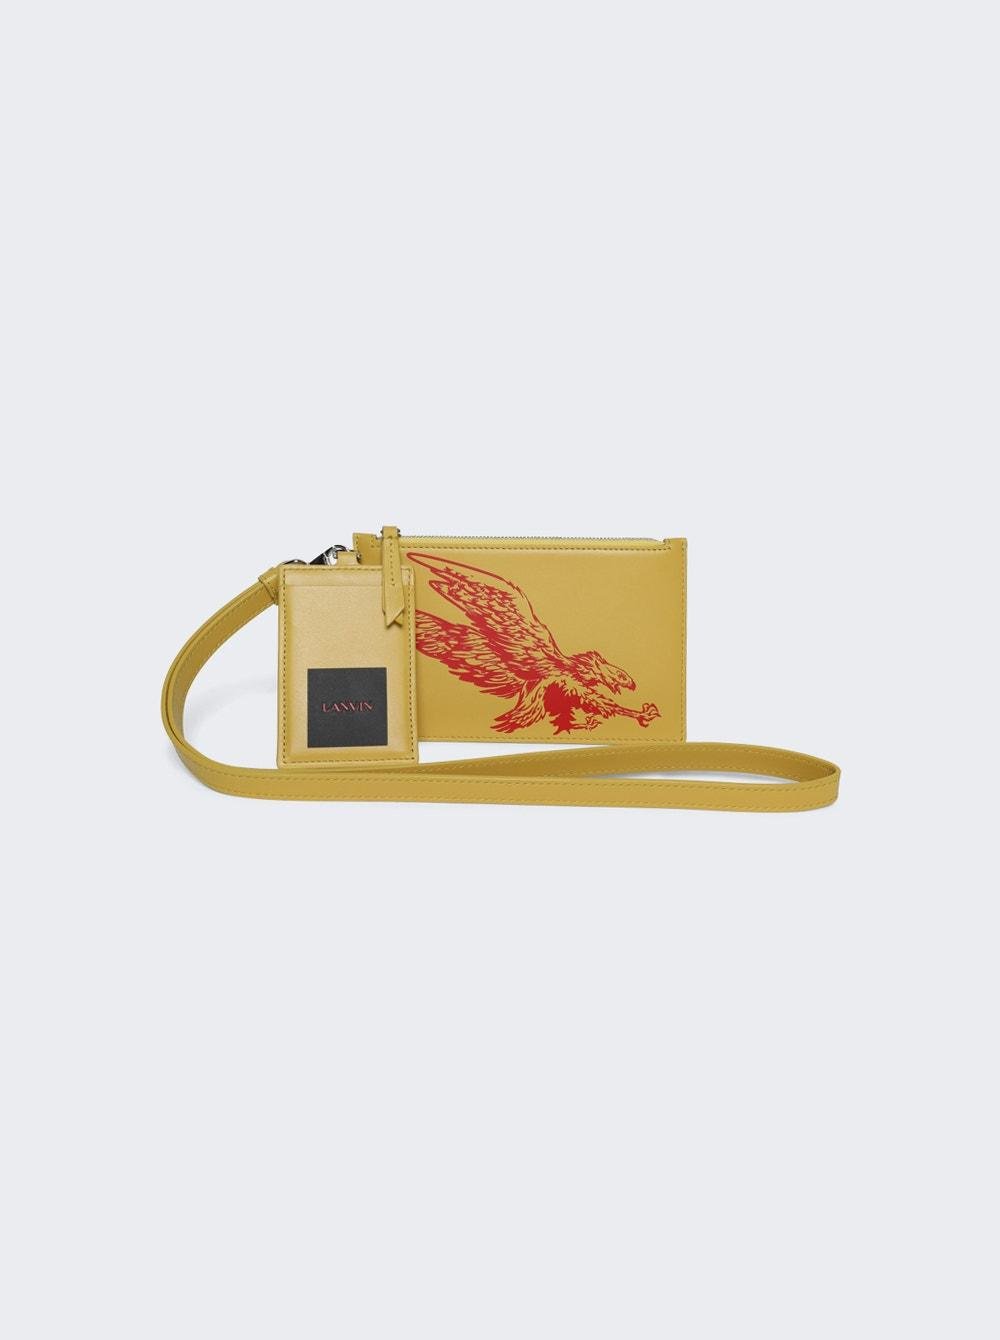 X Future Double Pouch With Eagle Print Bright Orange  | The Webster by LANVIN